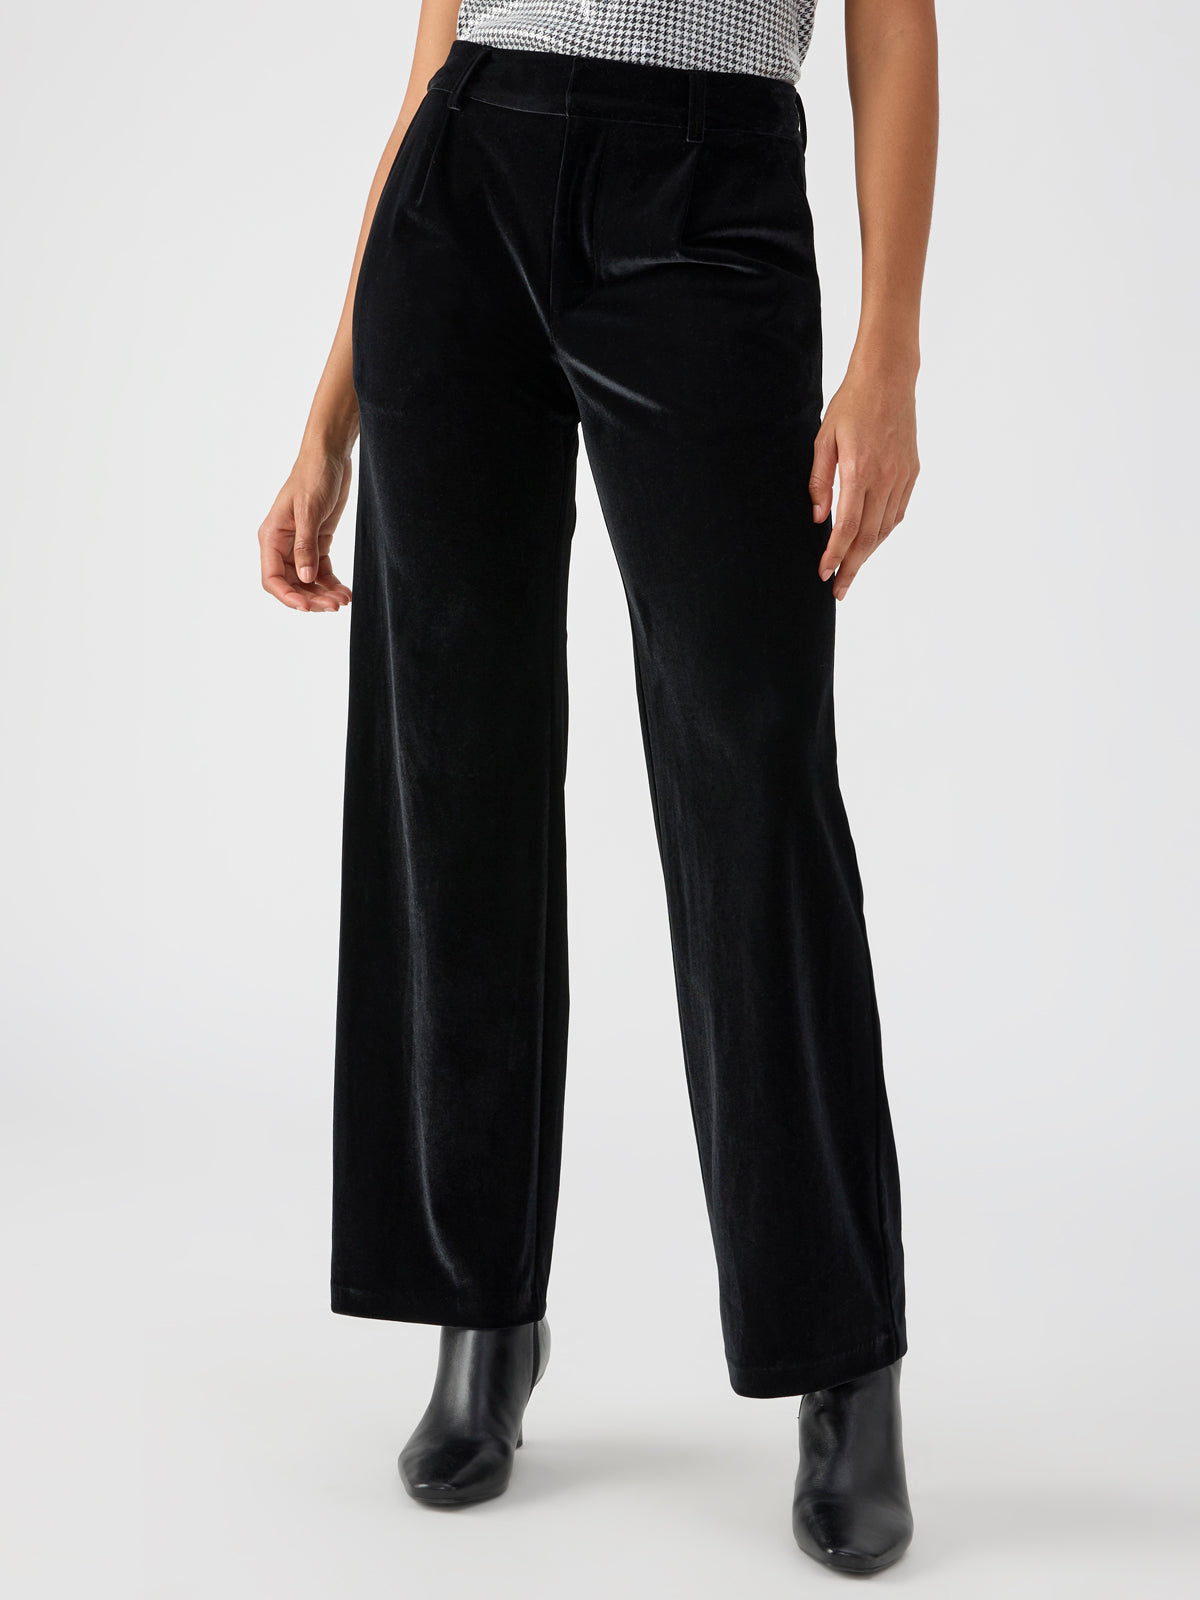 Plus Size Black Velvet Stretch Tapered Trousers | Yours Clothing